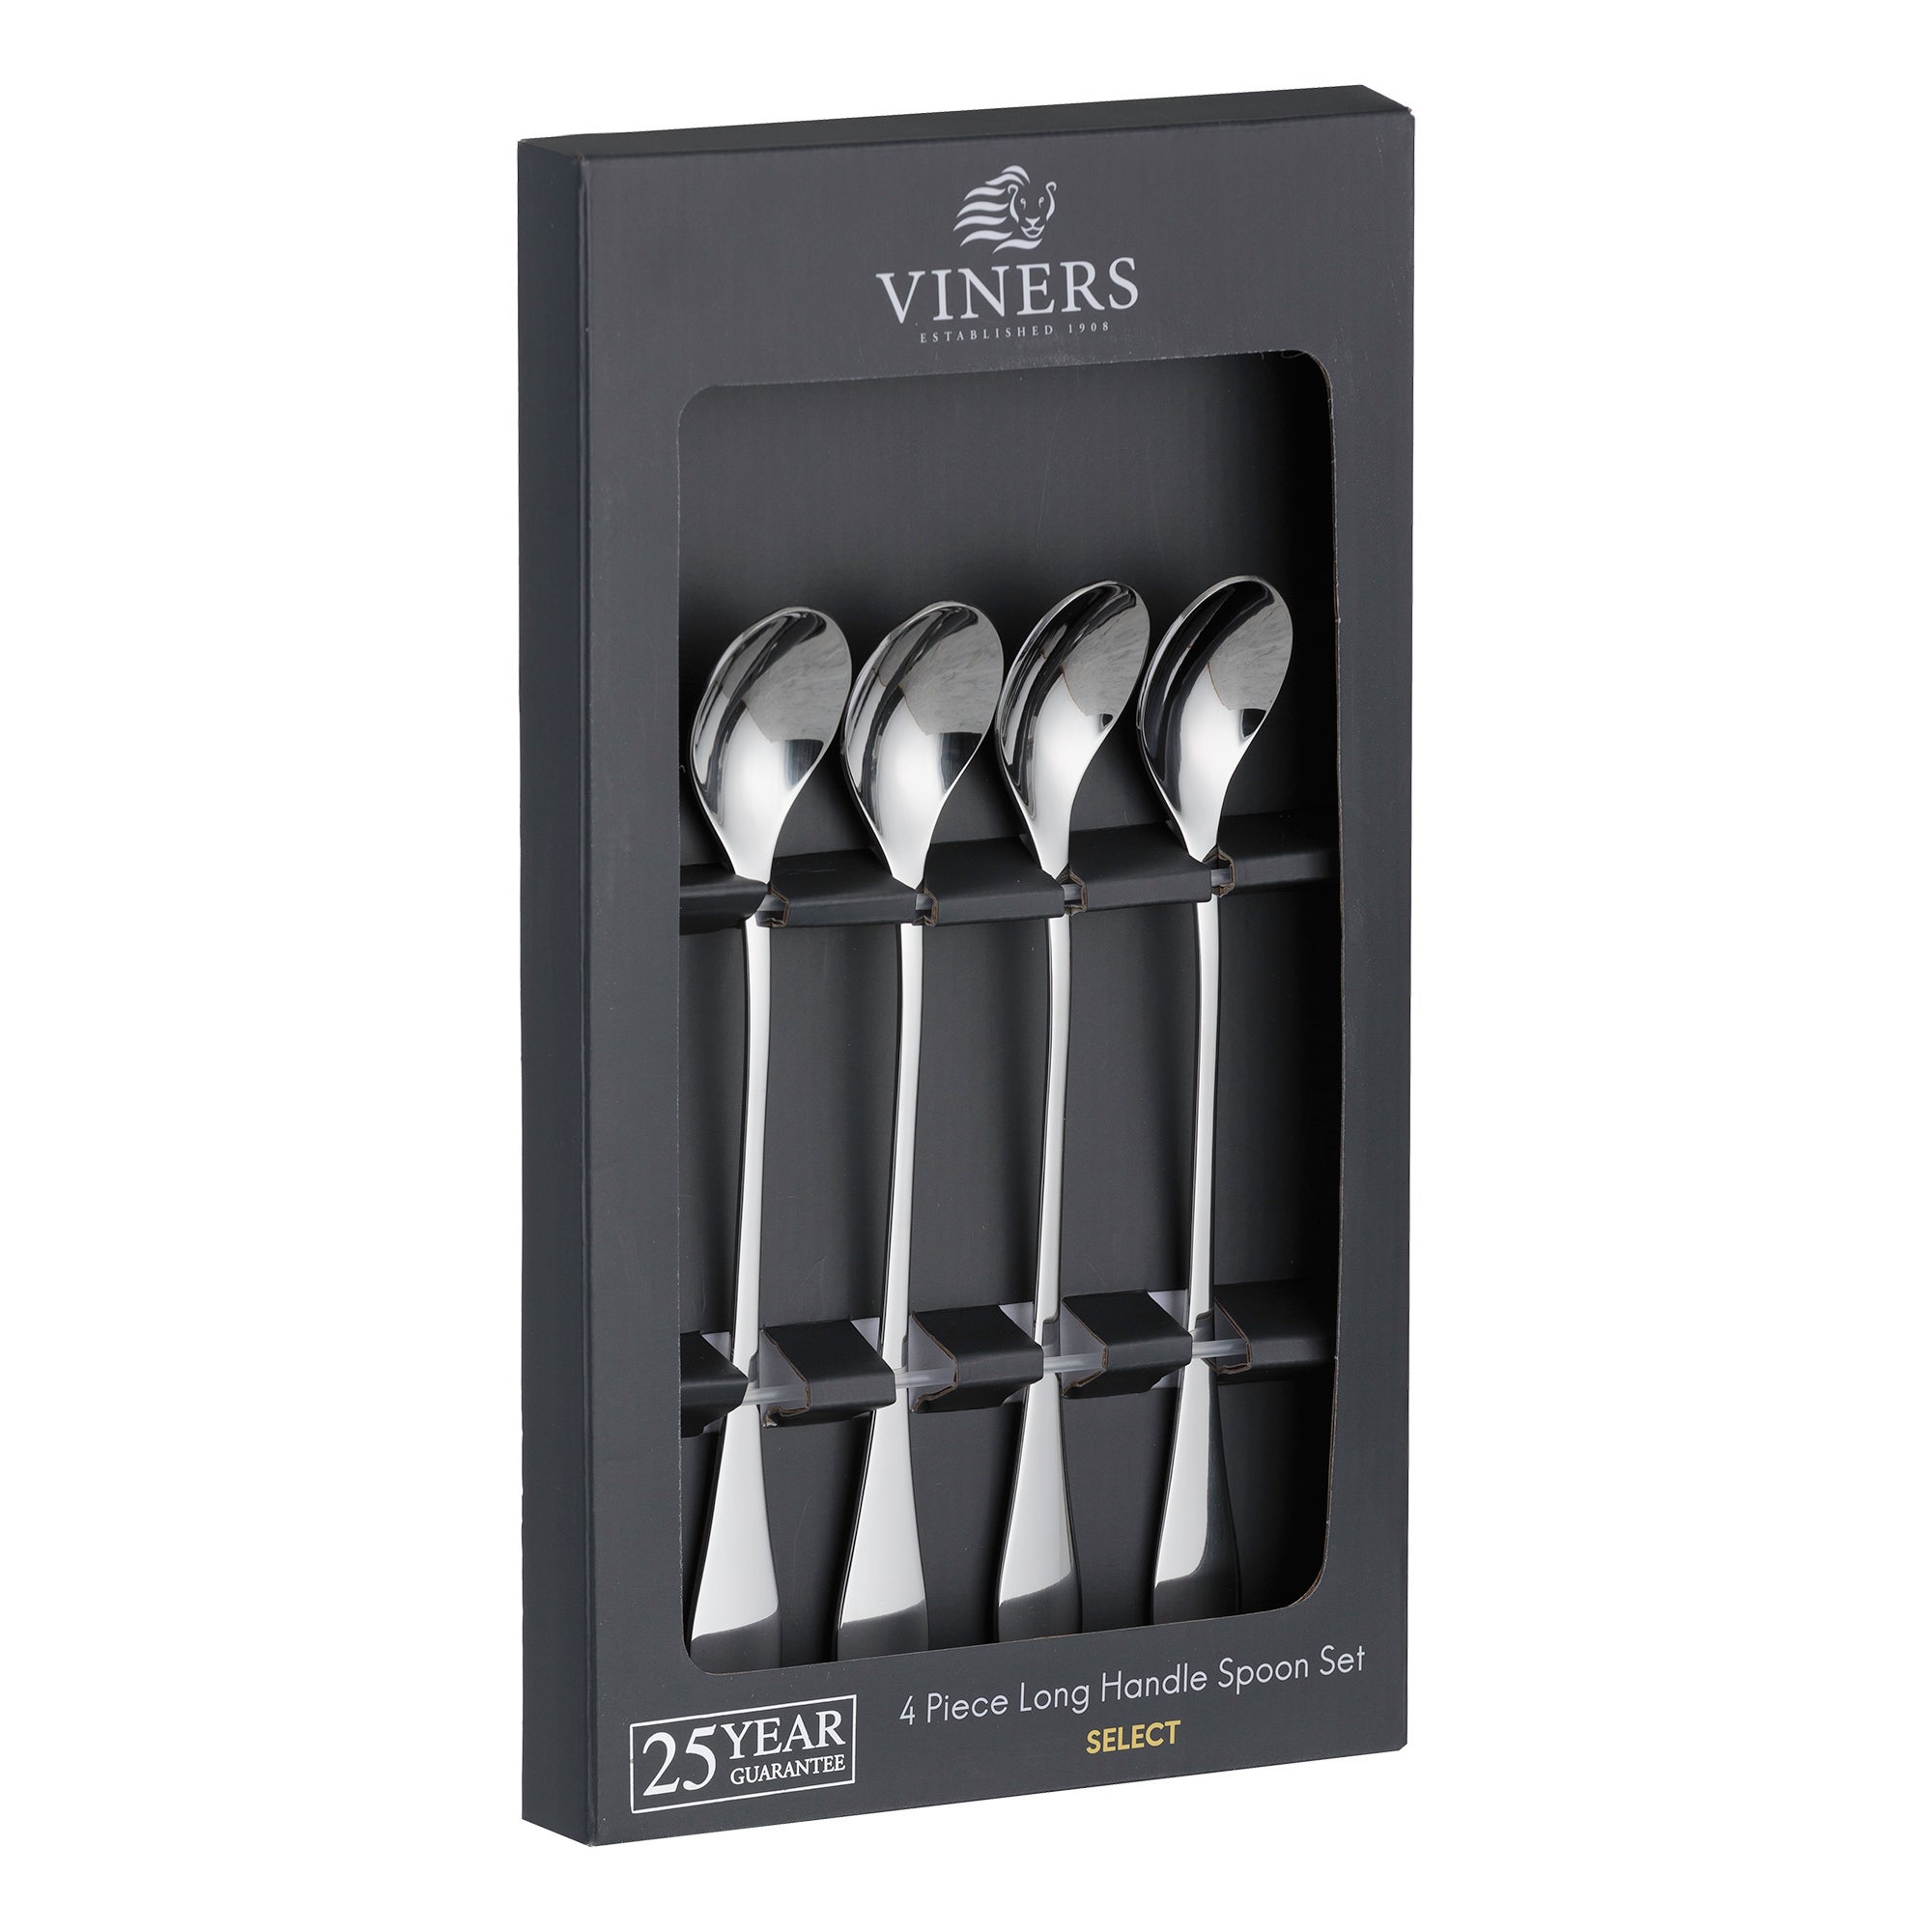 Viners Select Set of 4 Long Handled Spoons